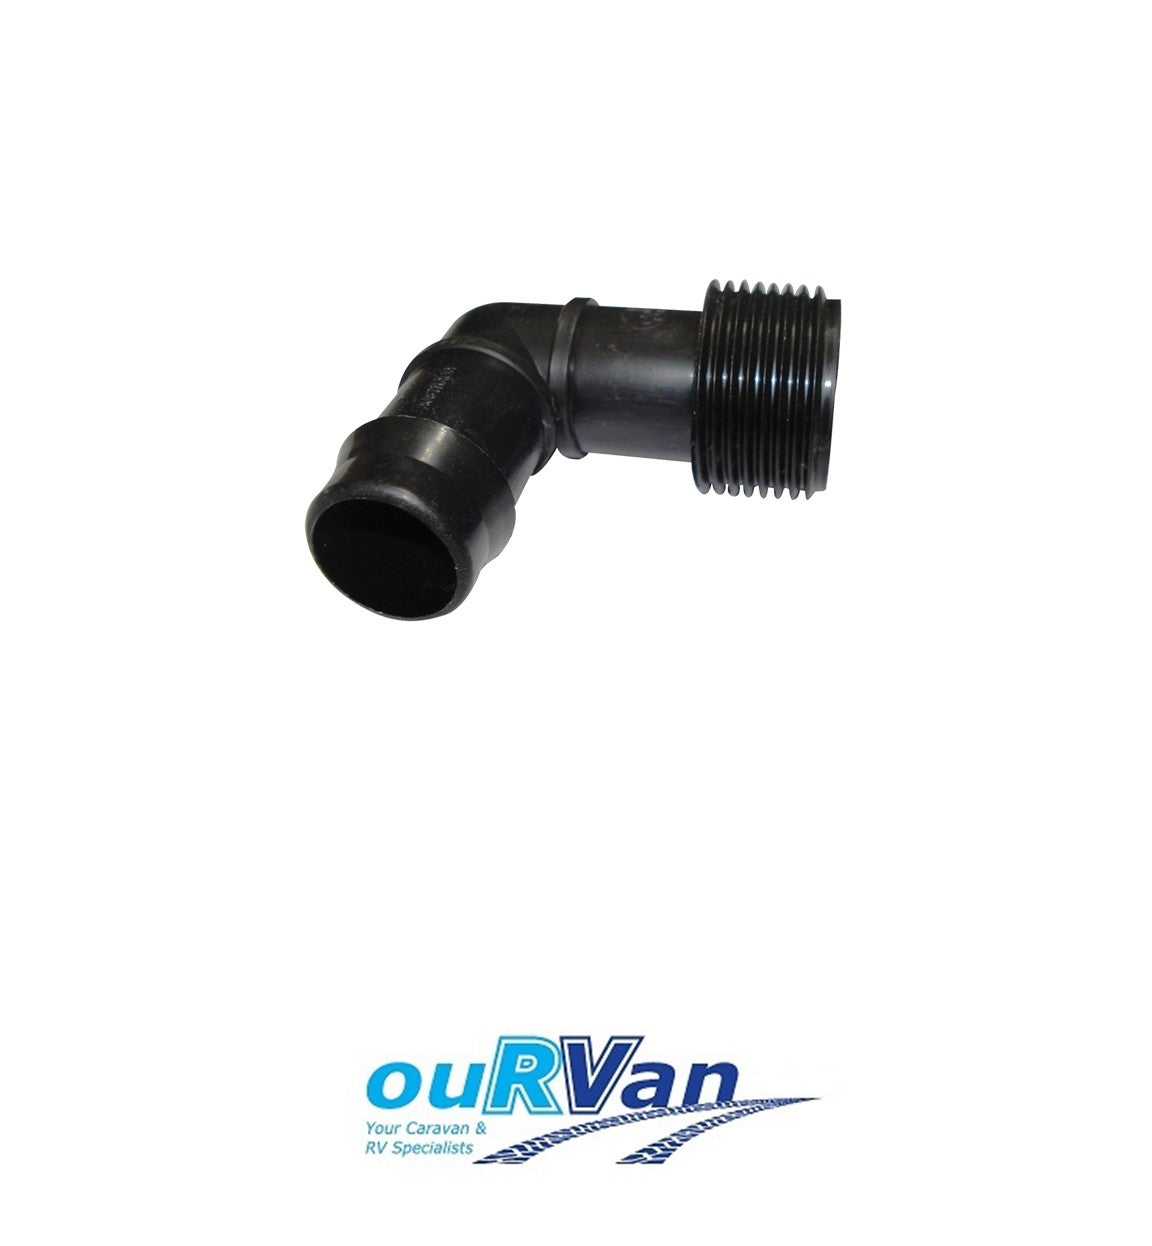 THREADED ELBOW 19MM BARBED x 3/4 BSP MALE. 800-02366